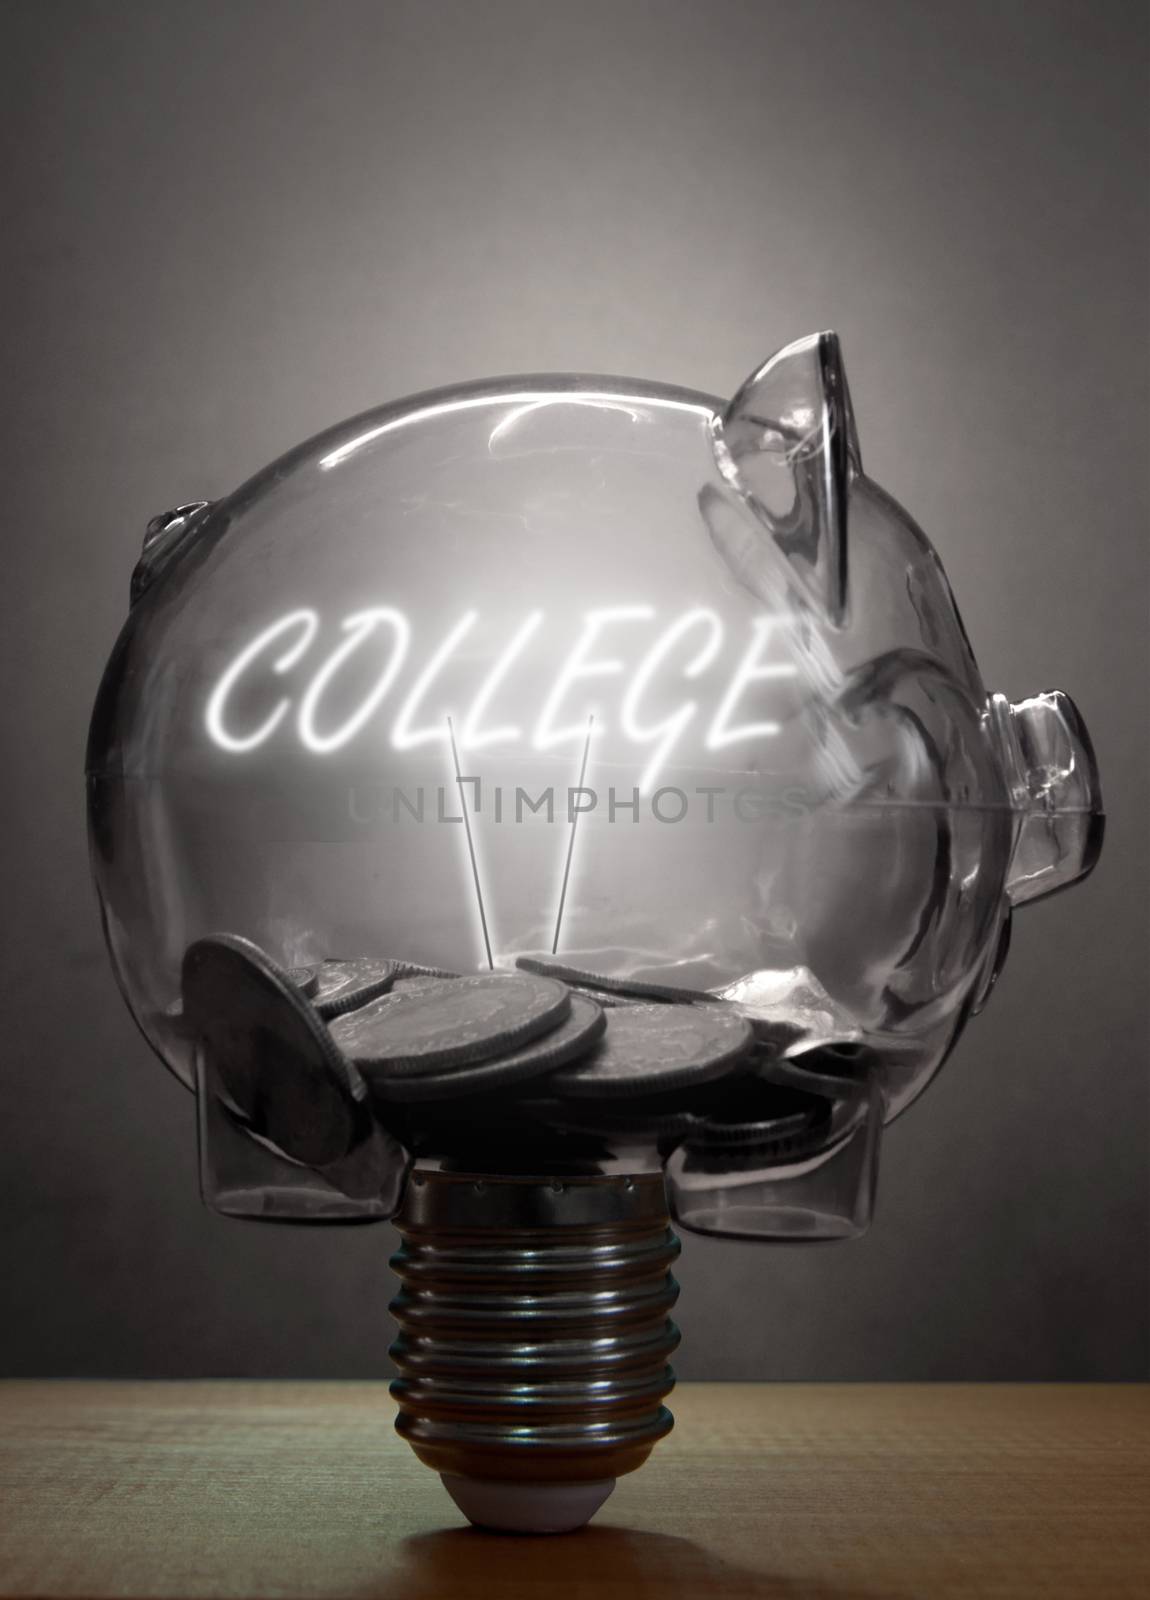 Piggybank light bulb with college lit text inside and cash